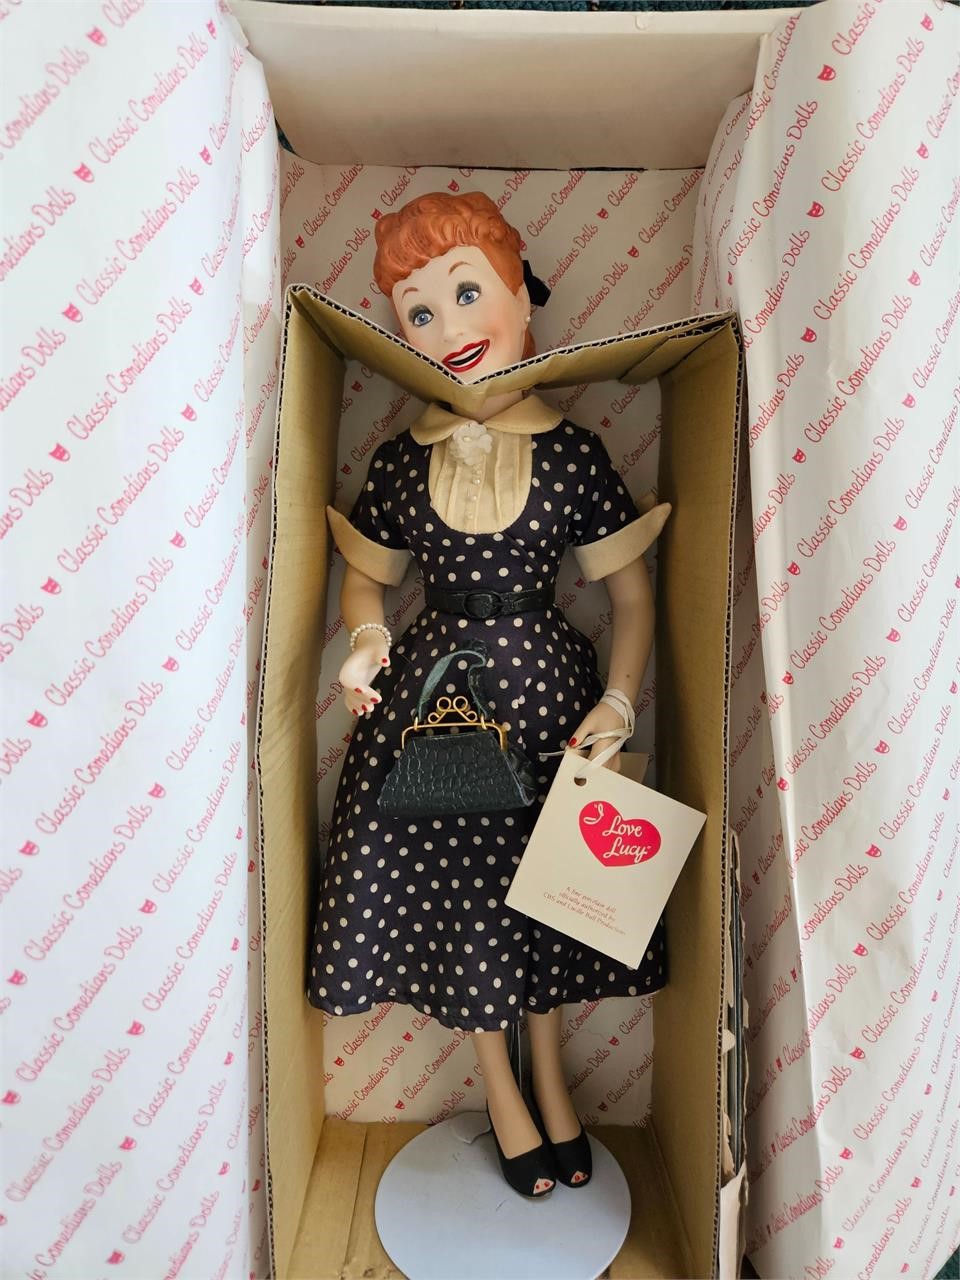 I love Lucy Porcelain Doll